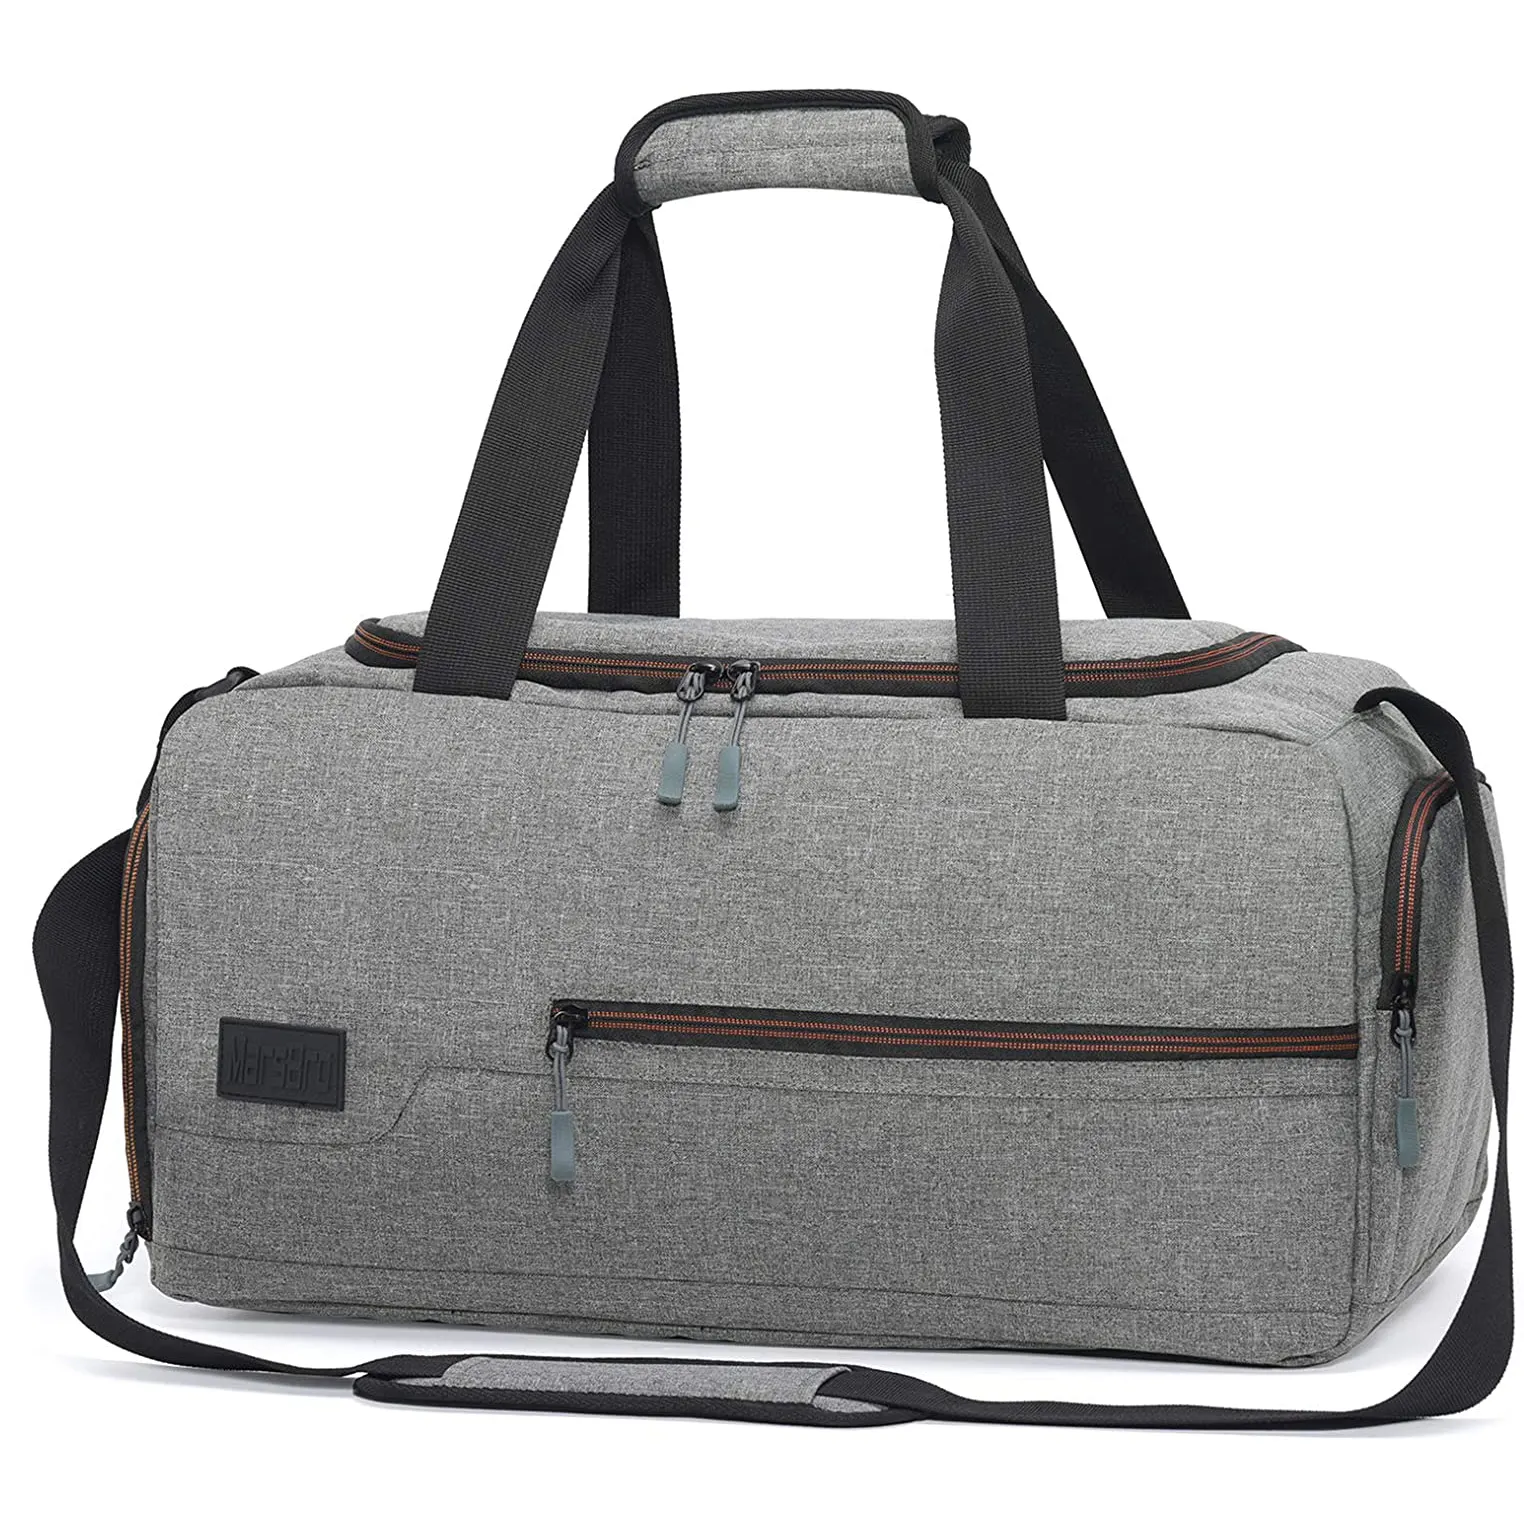 Travel Duffel Duffle and Best Practical Sports Gym Sports Bag